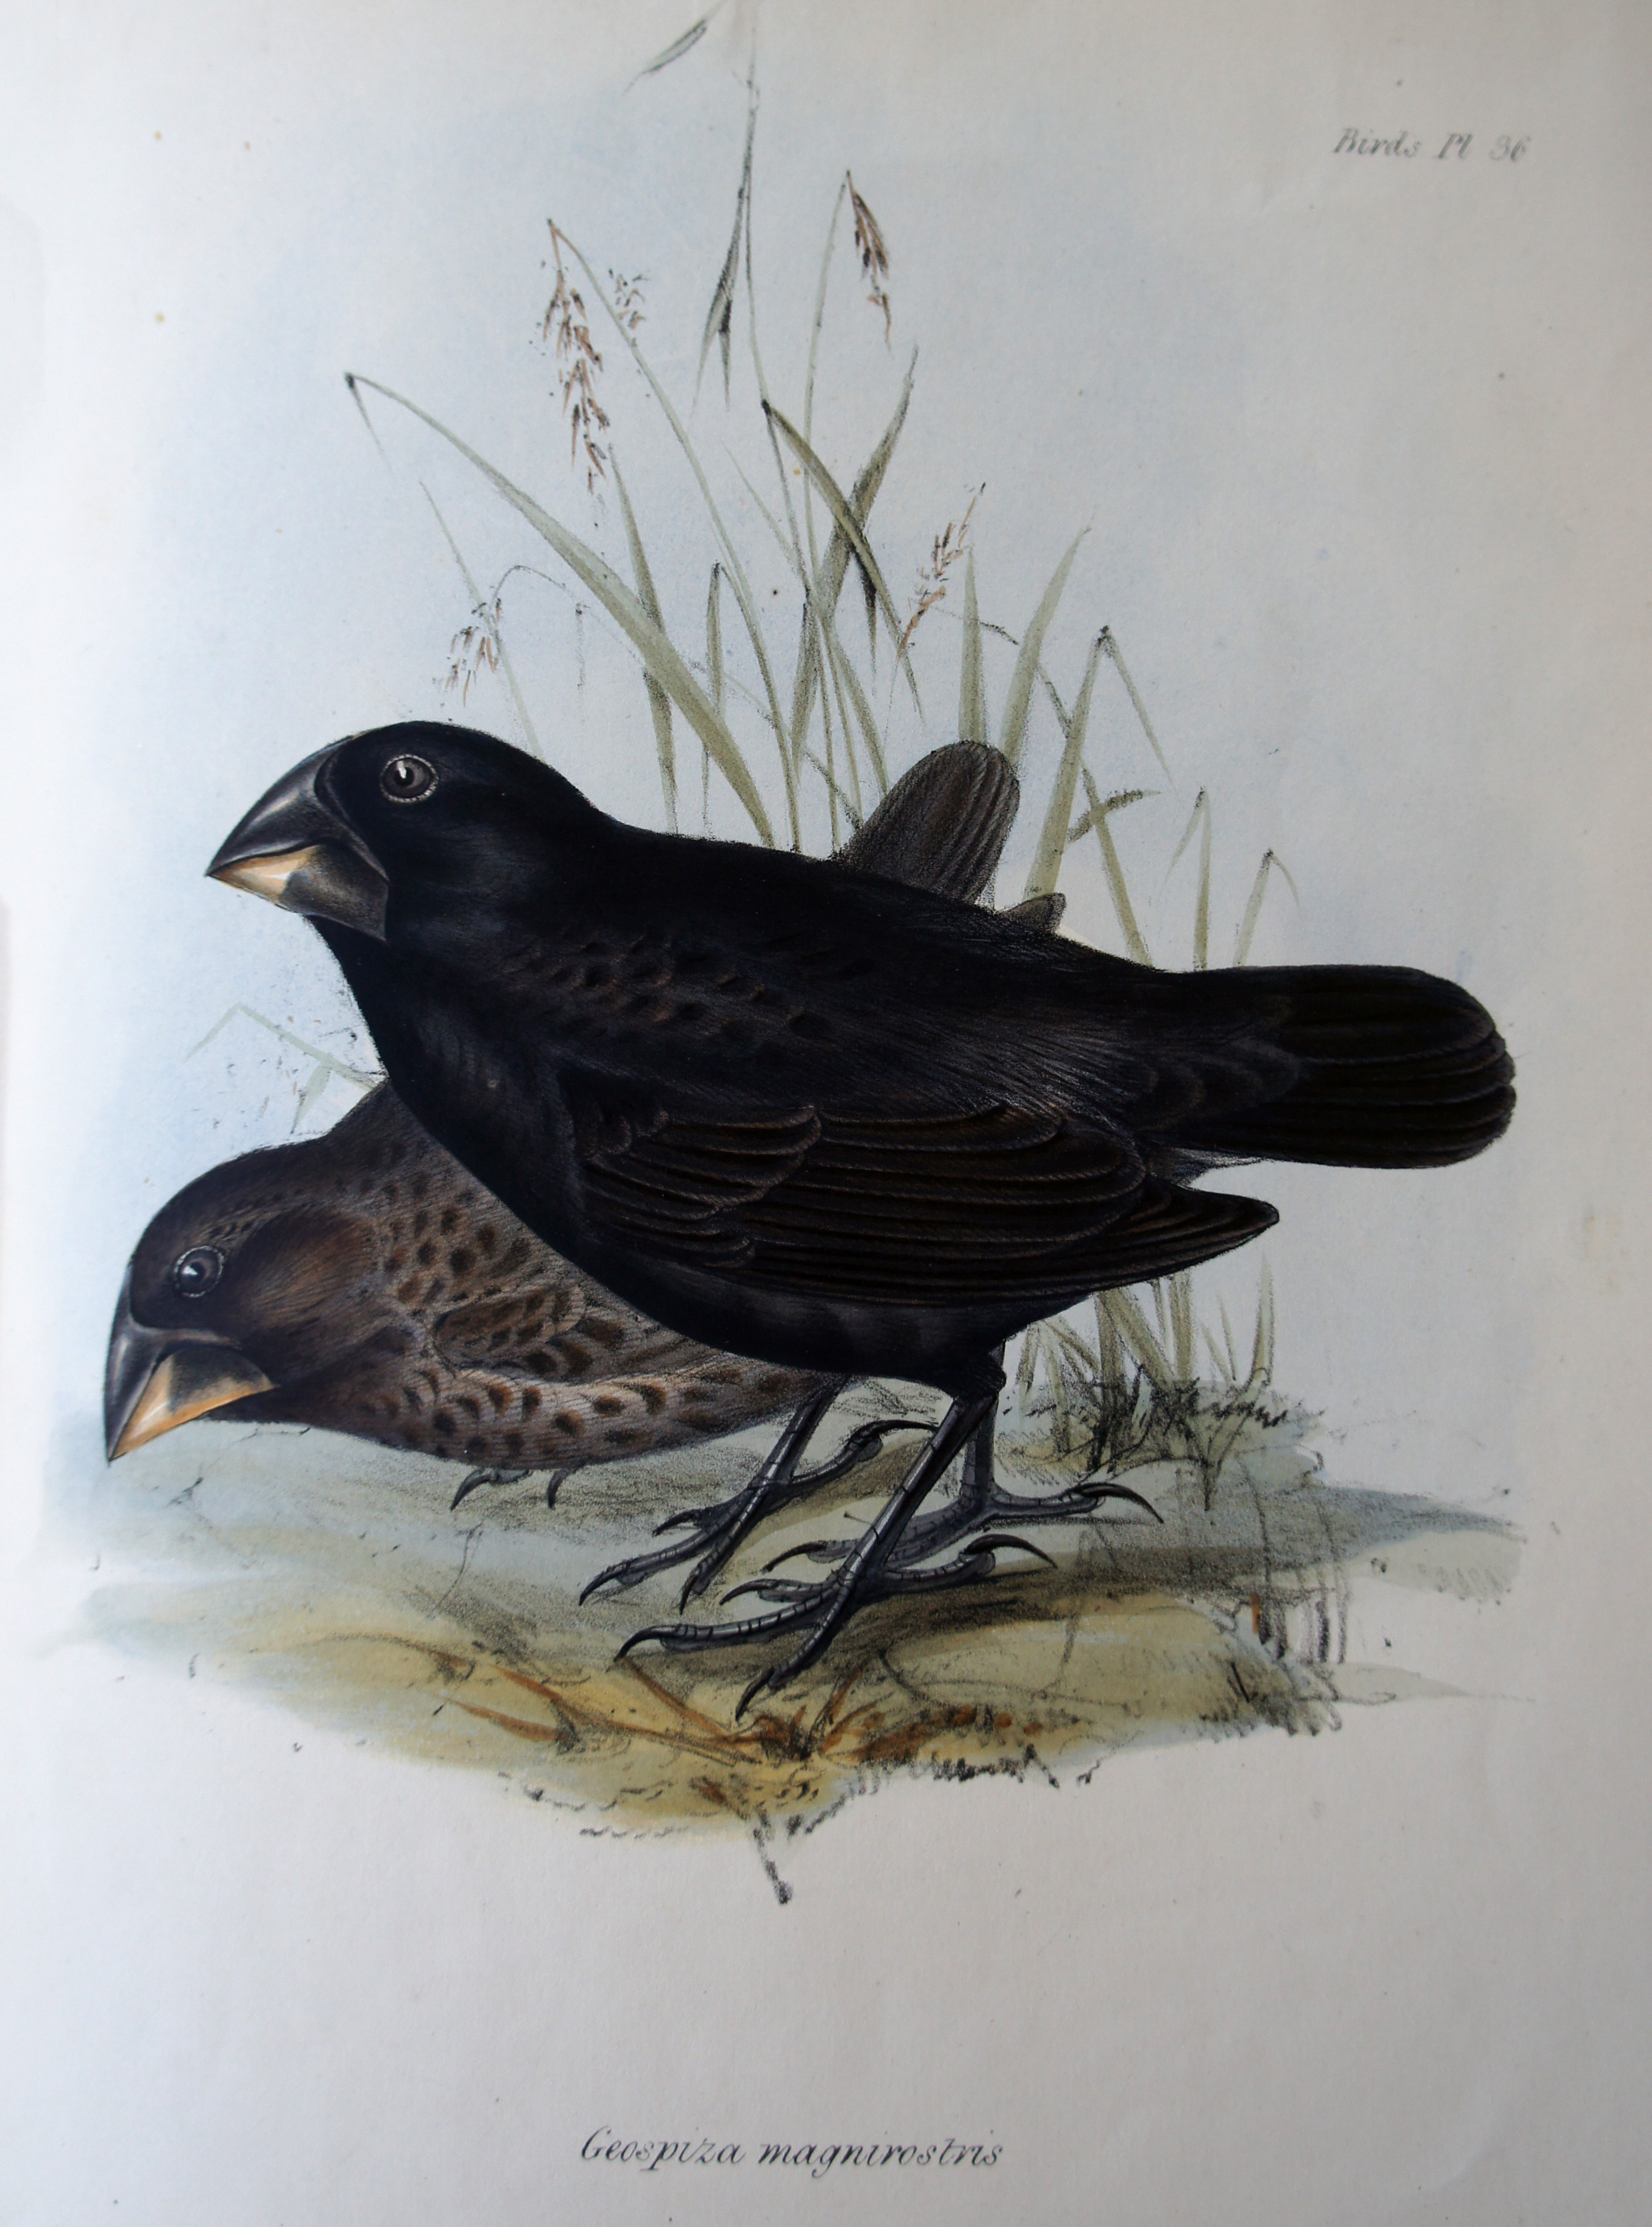 Zoology library archive image: Plate 36: Geospiza magnirostris [Large ground finch]